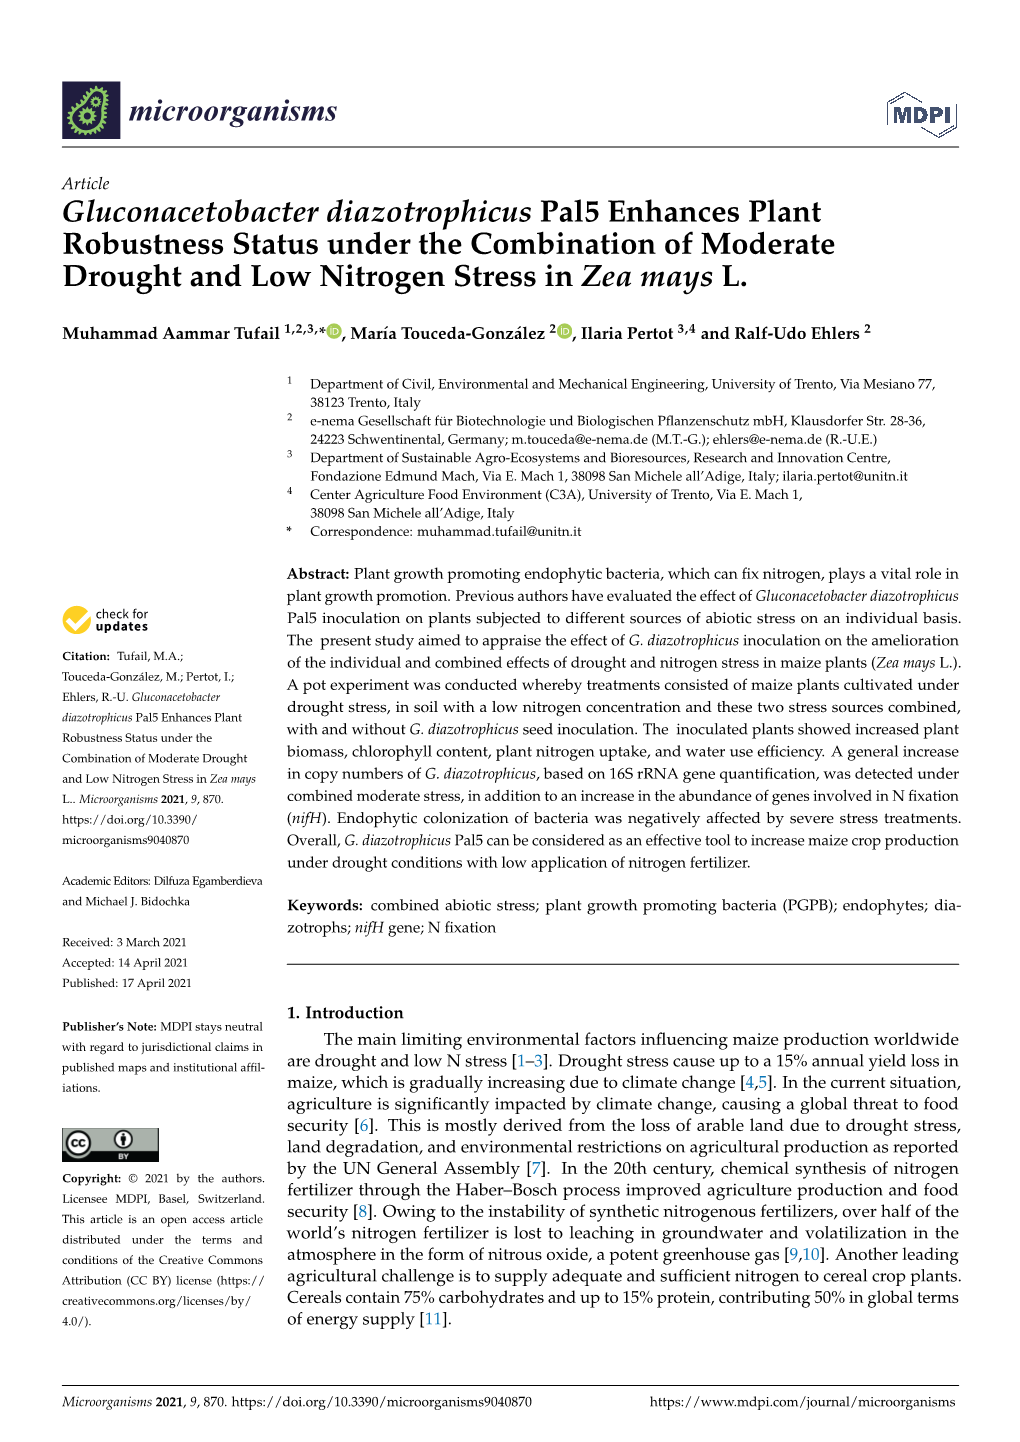 Gluconacetobacter Diazotrophicus Pal5 Enhances Plant Robustness Status Under the Combination of Moderate Drought and Low Nitrogen Stress in Zea Mays L